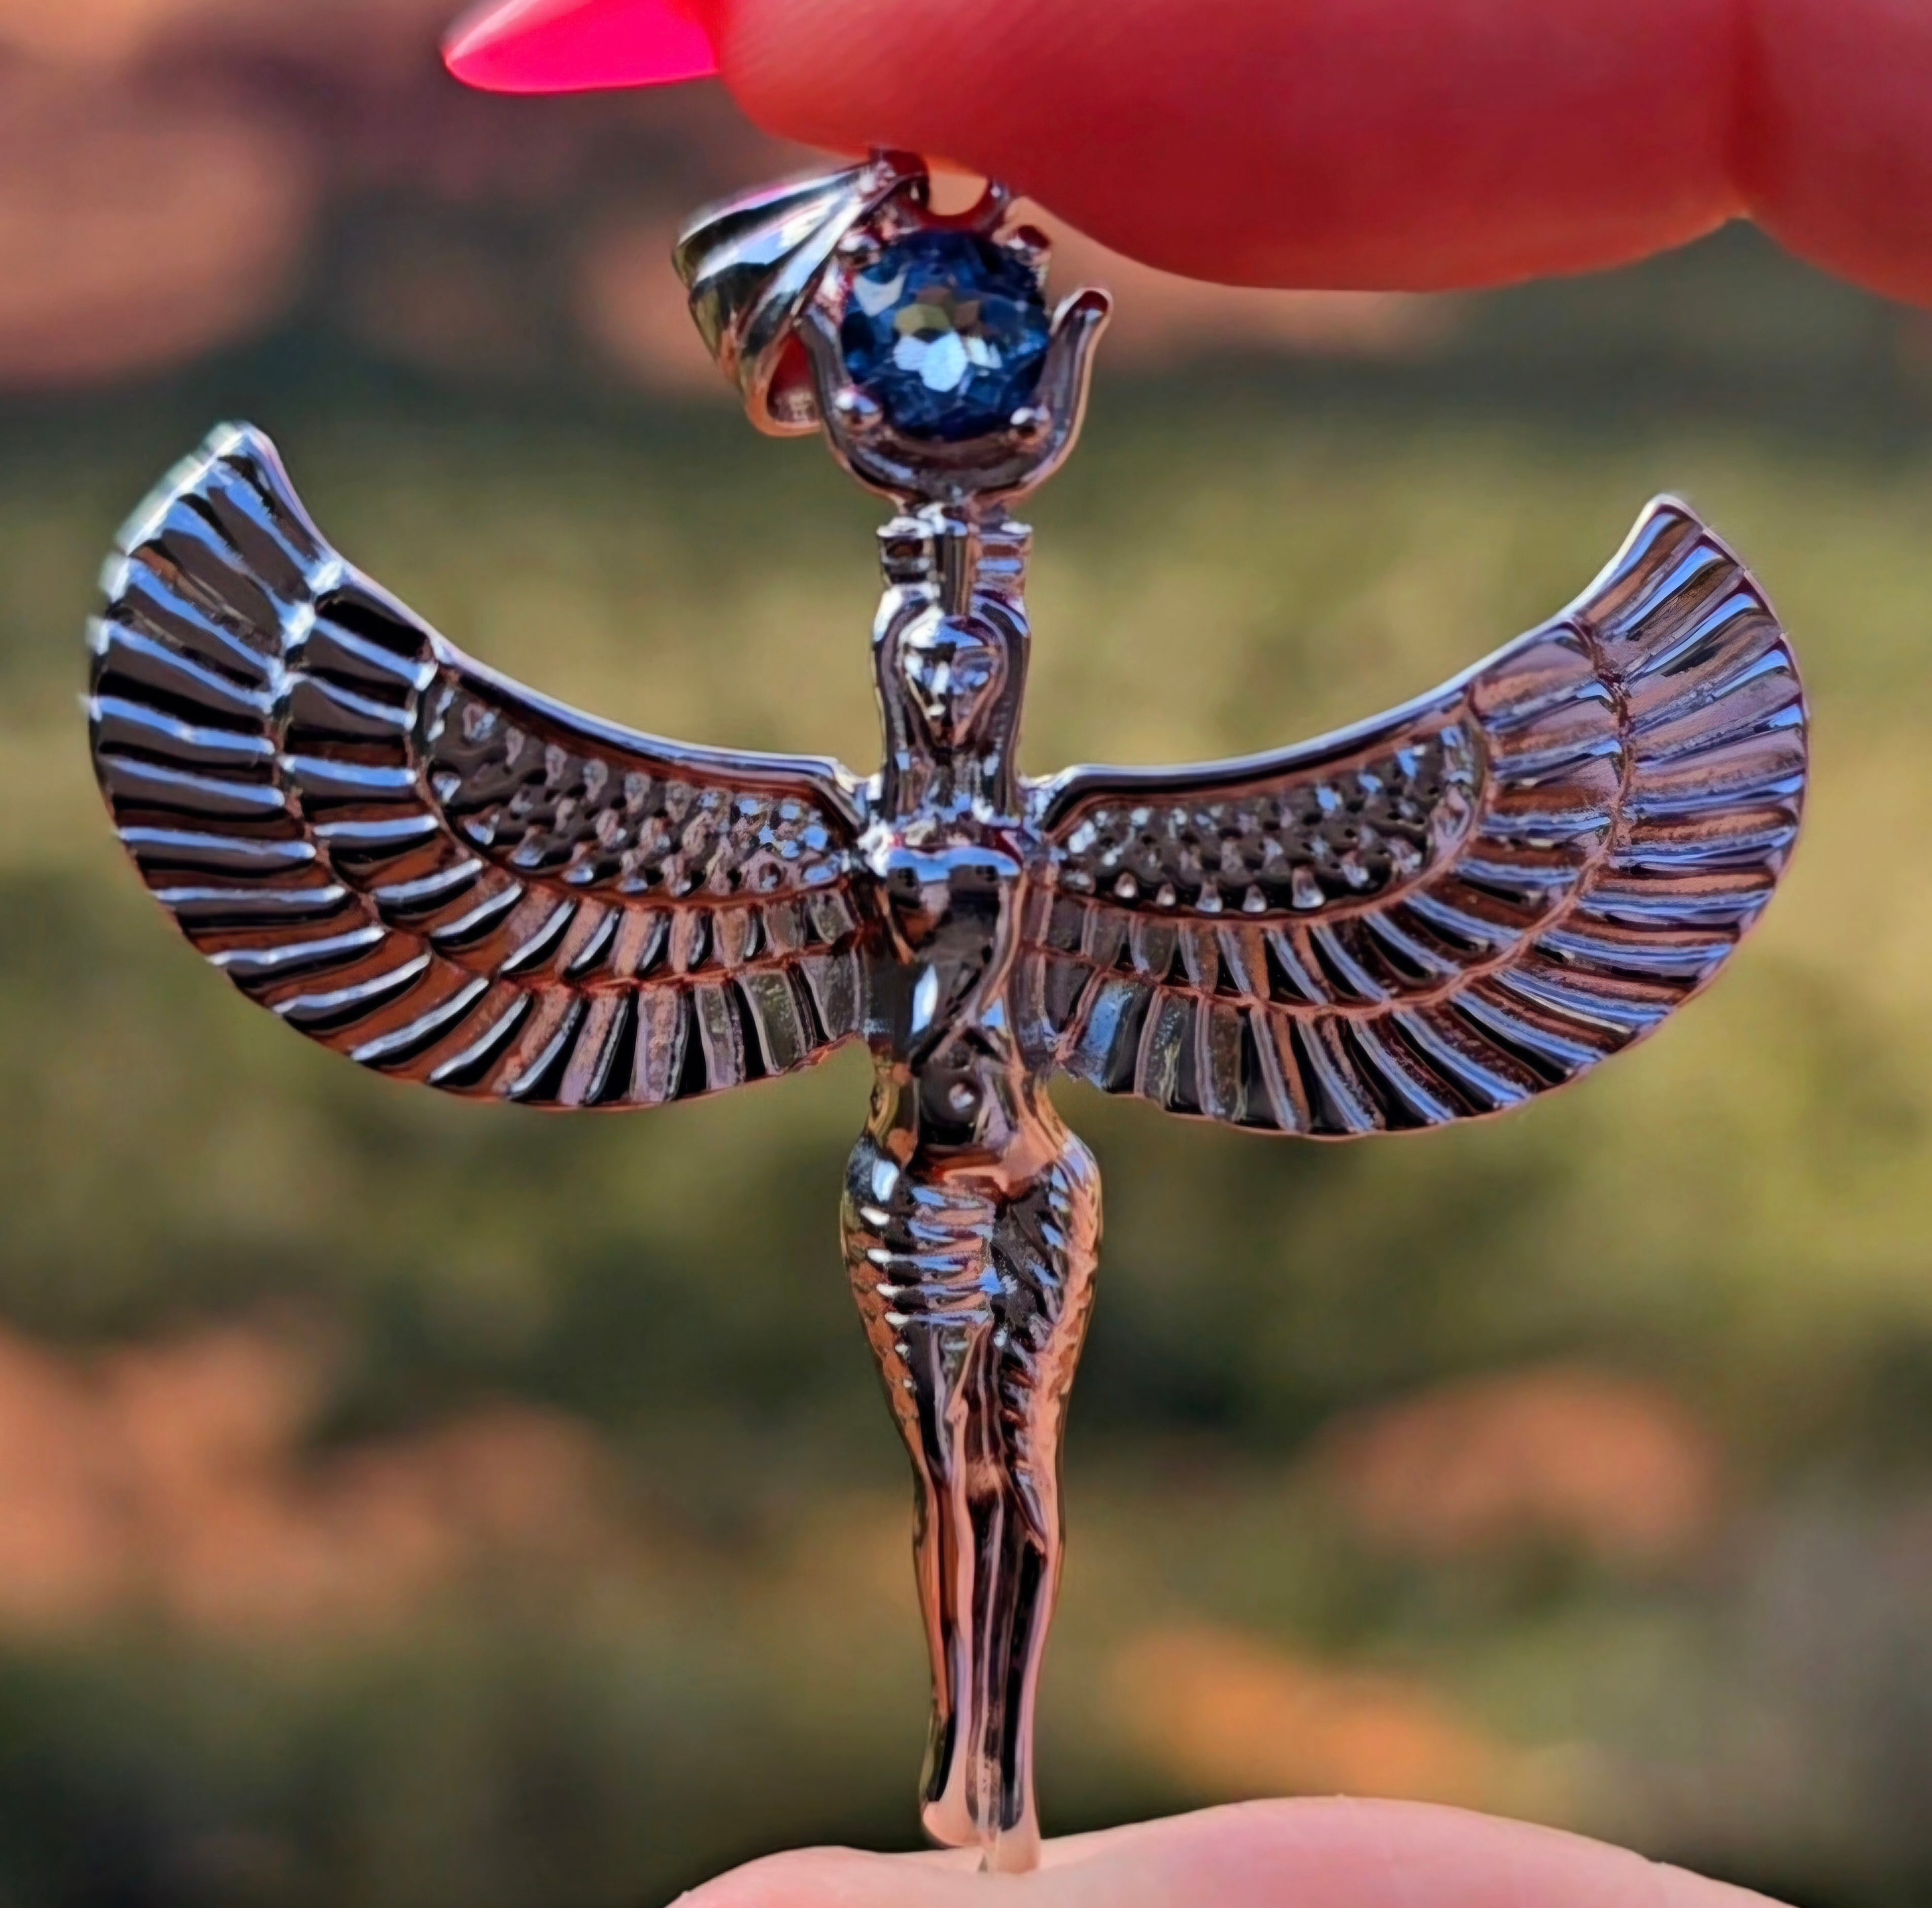 Blue Topaz Isis Goddess Amulet Pendant .925 Silver for Communication, Enhancing Psychic Abilities, Protection and Wisdom